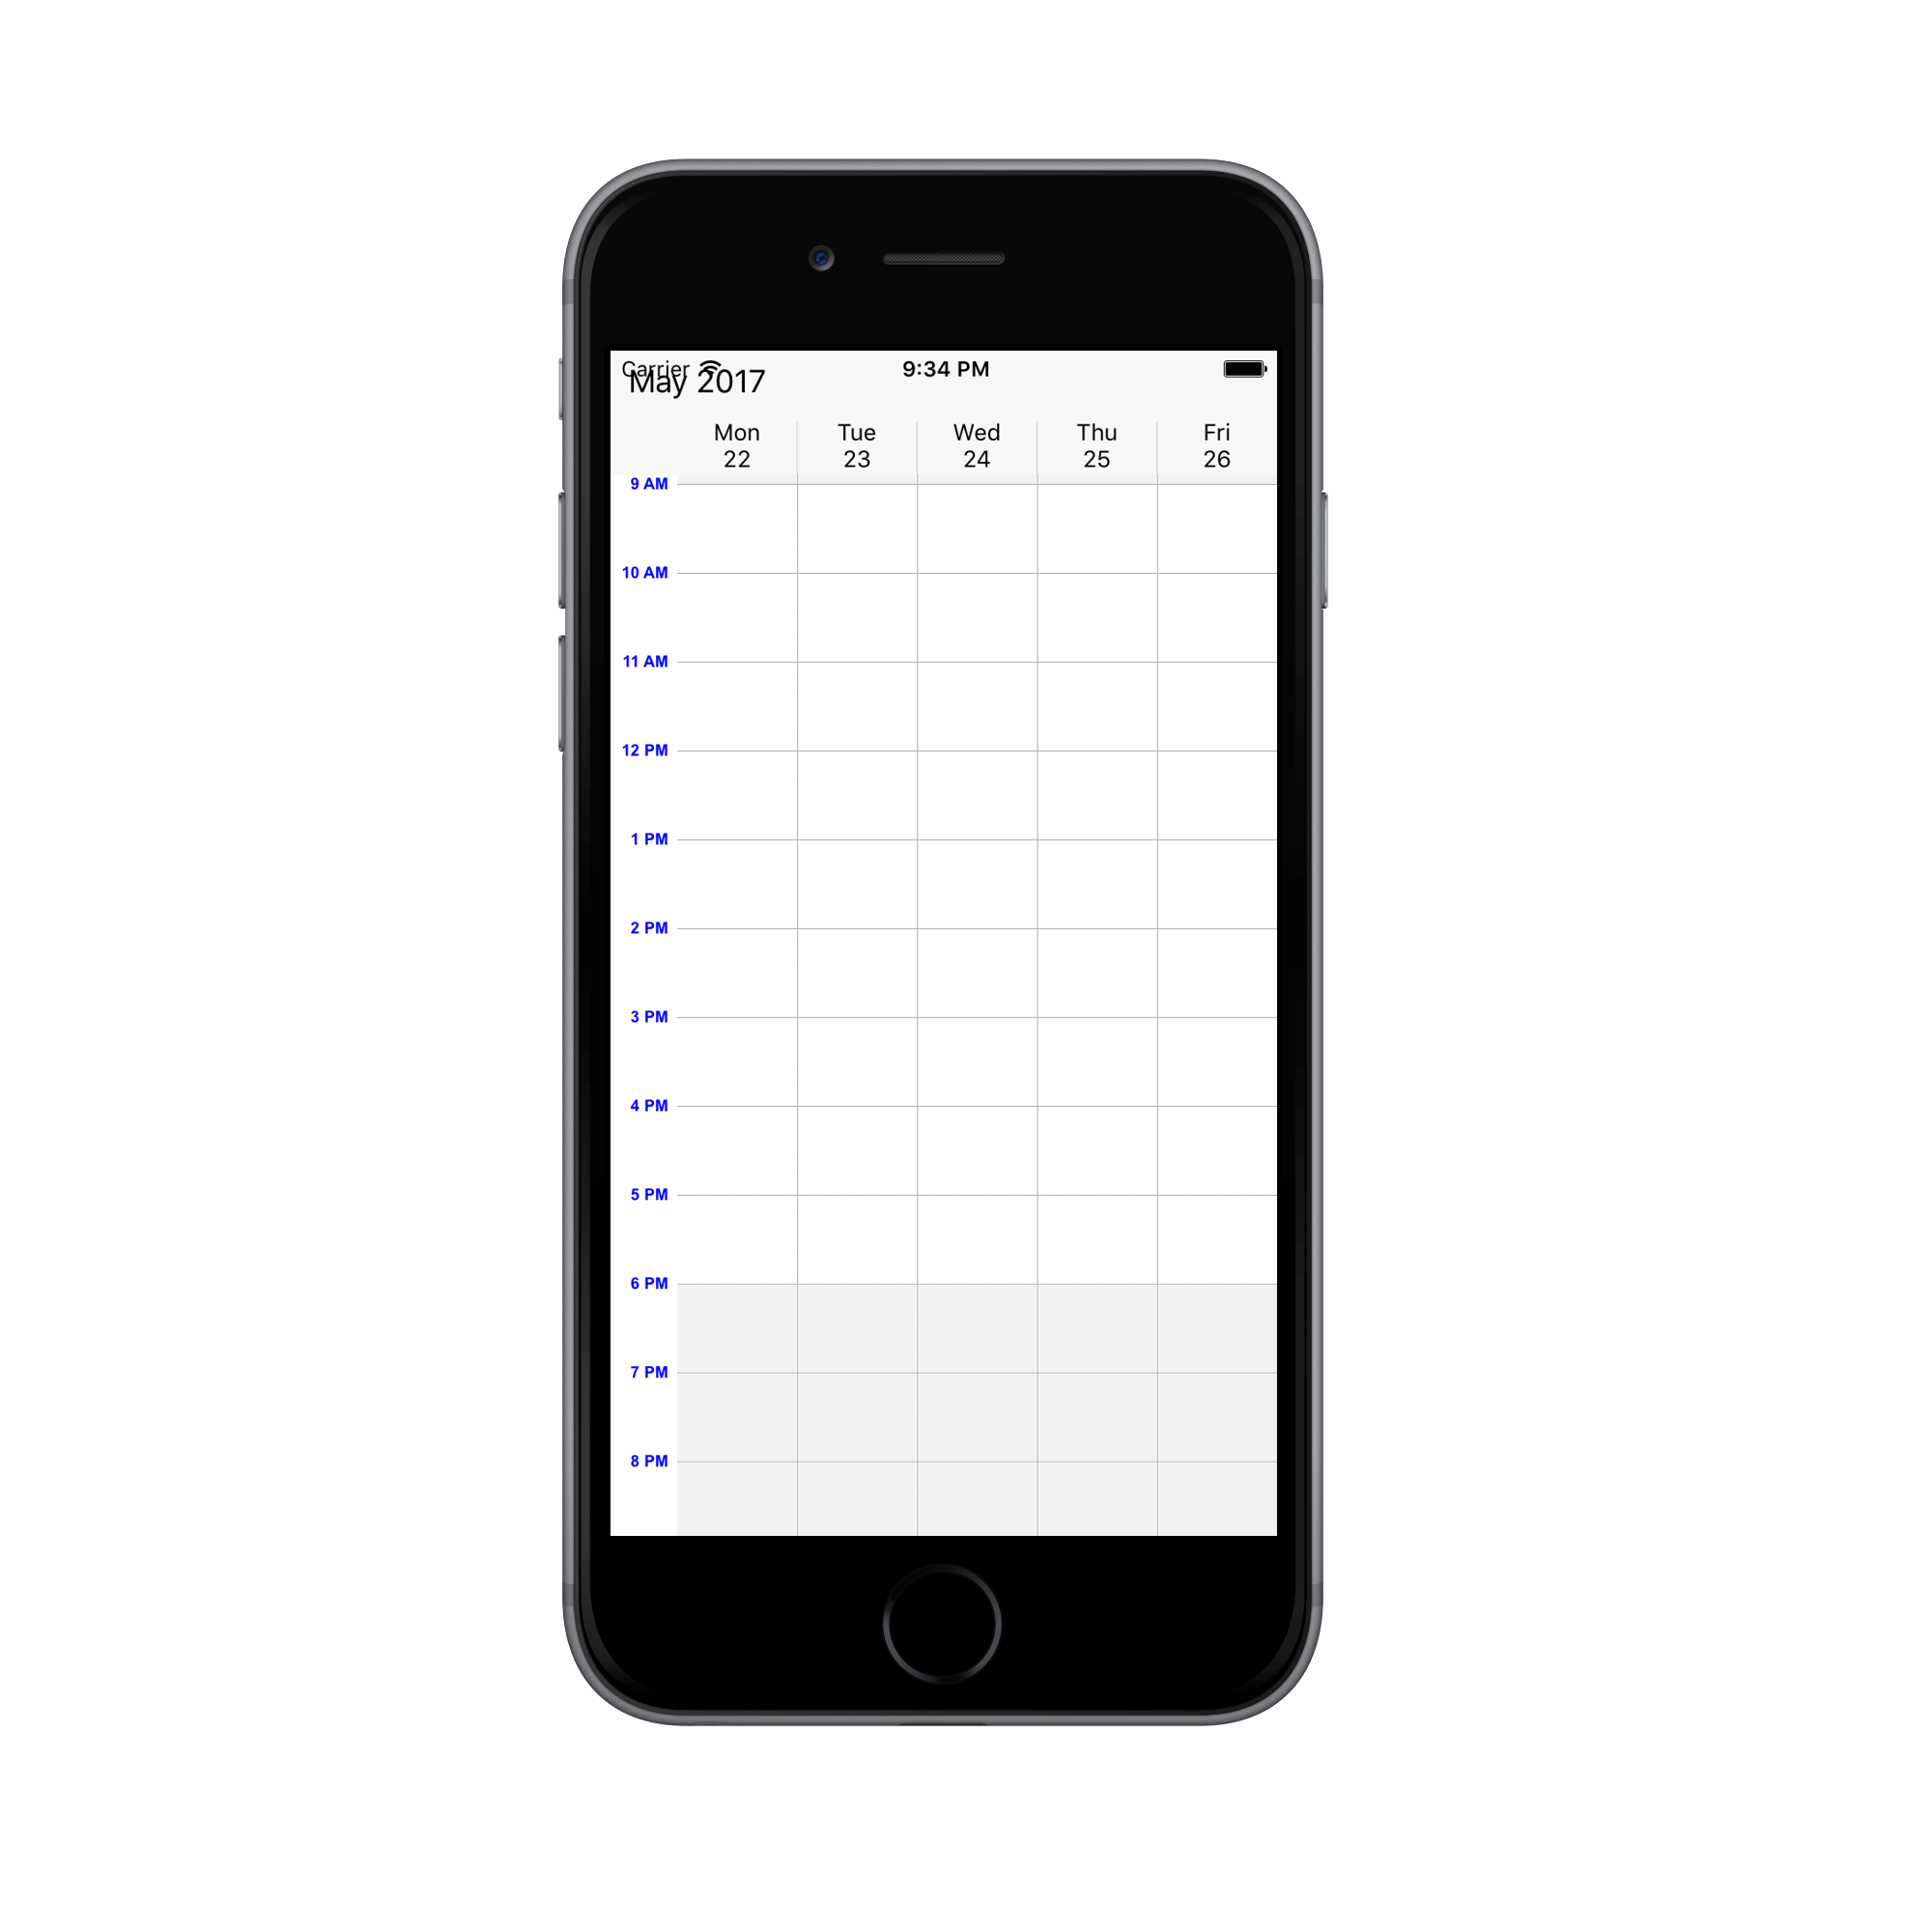 Work week view time label appearance customization for schedule in Xamarin.iOS